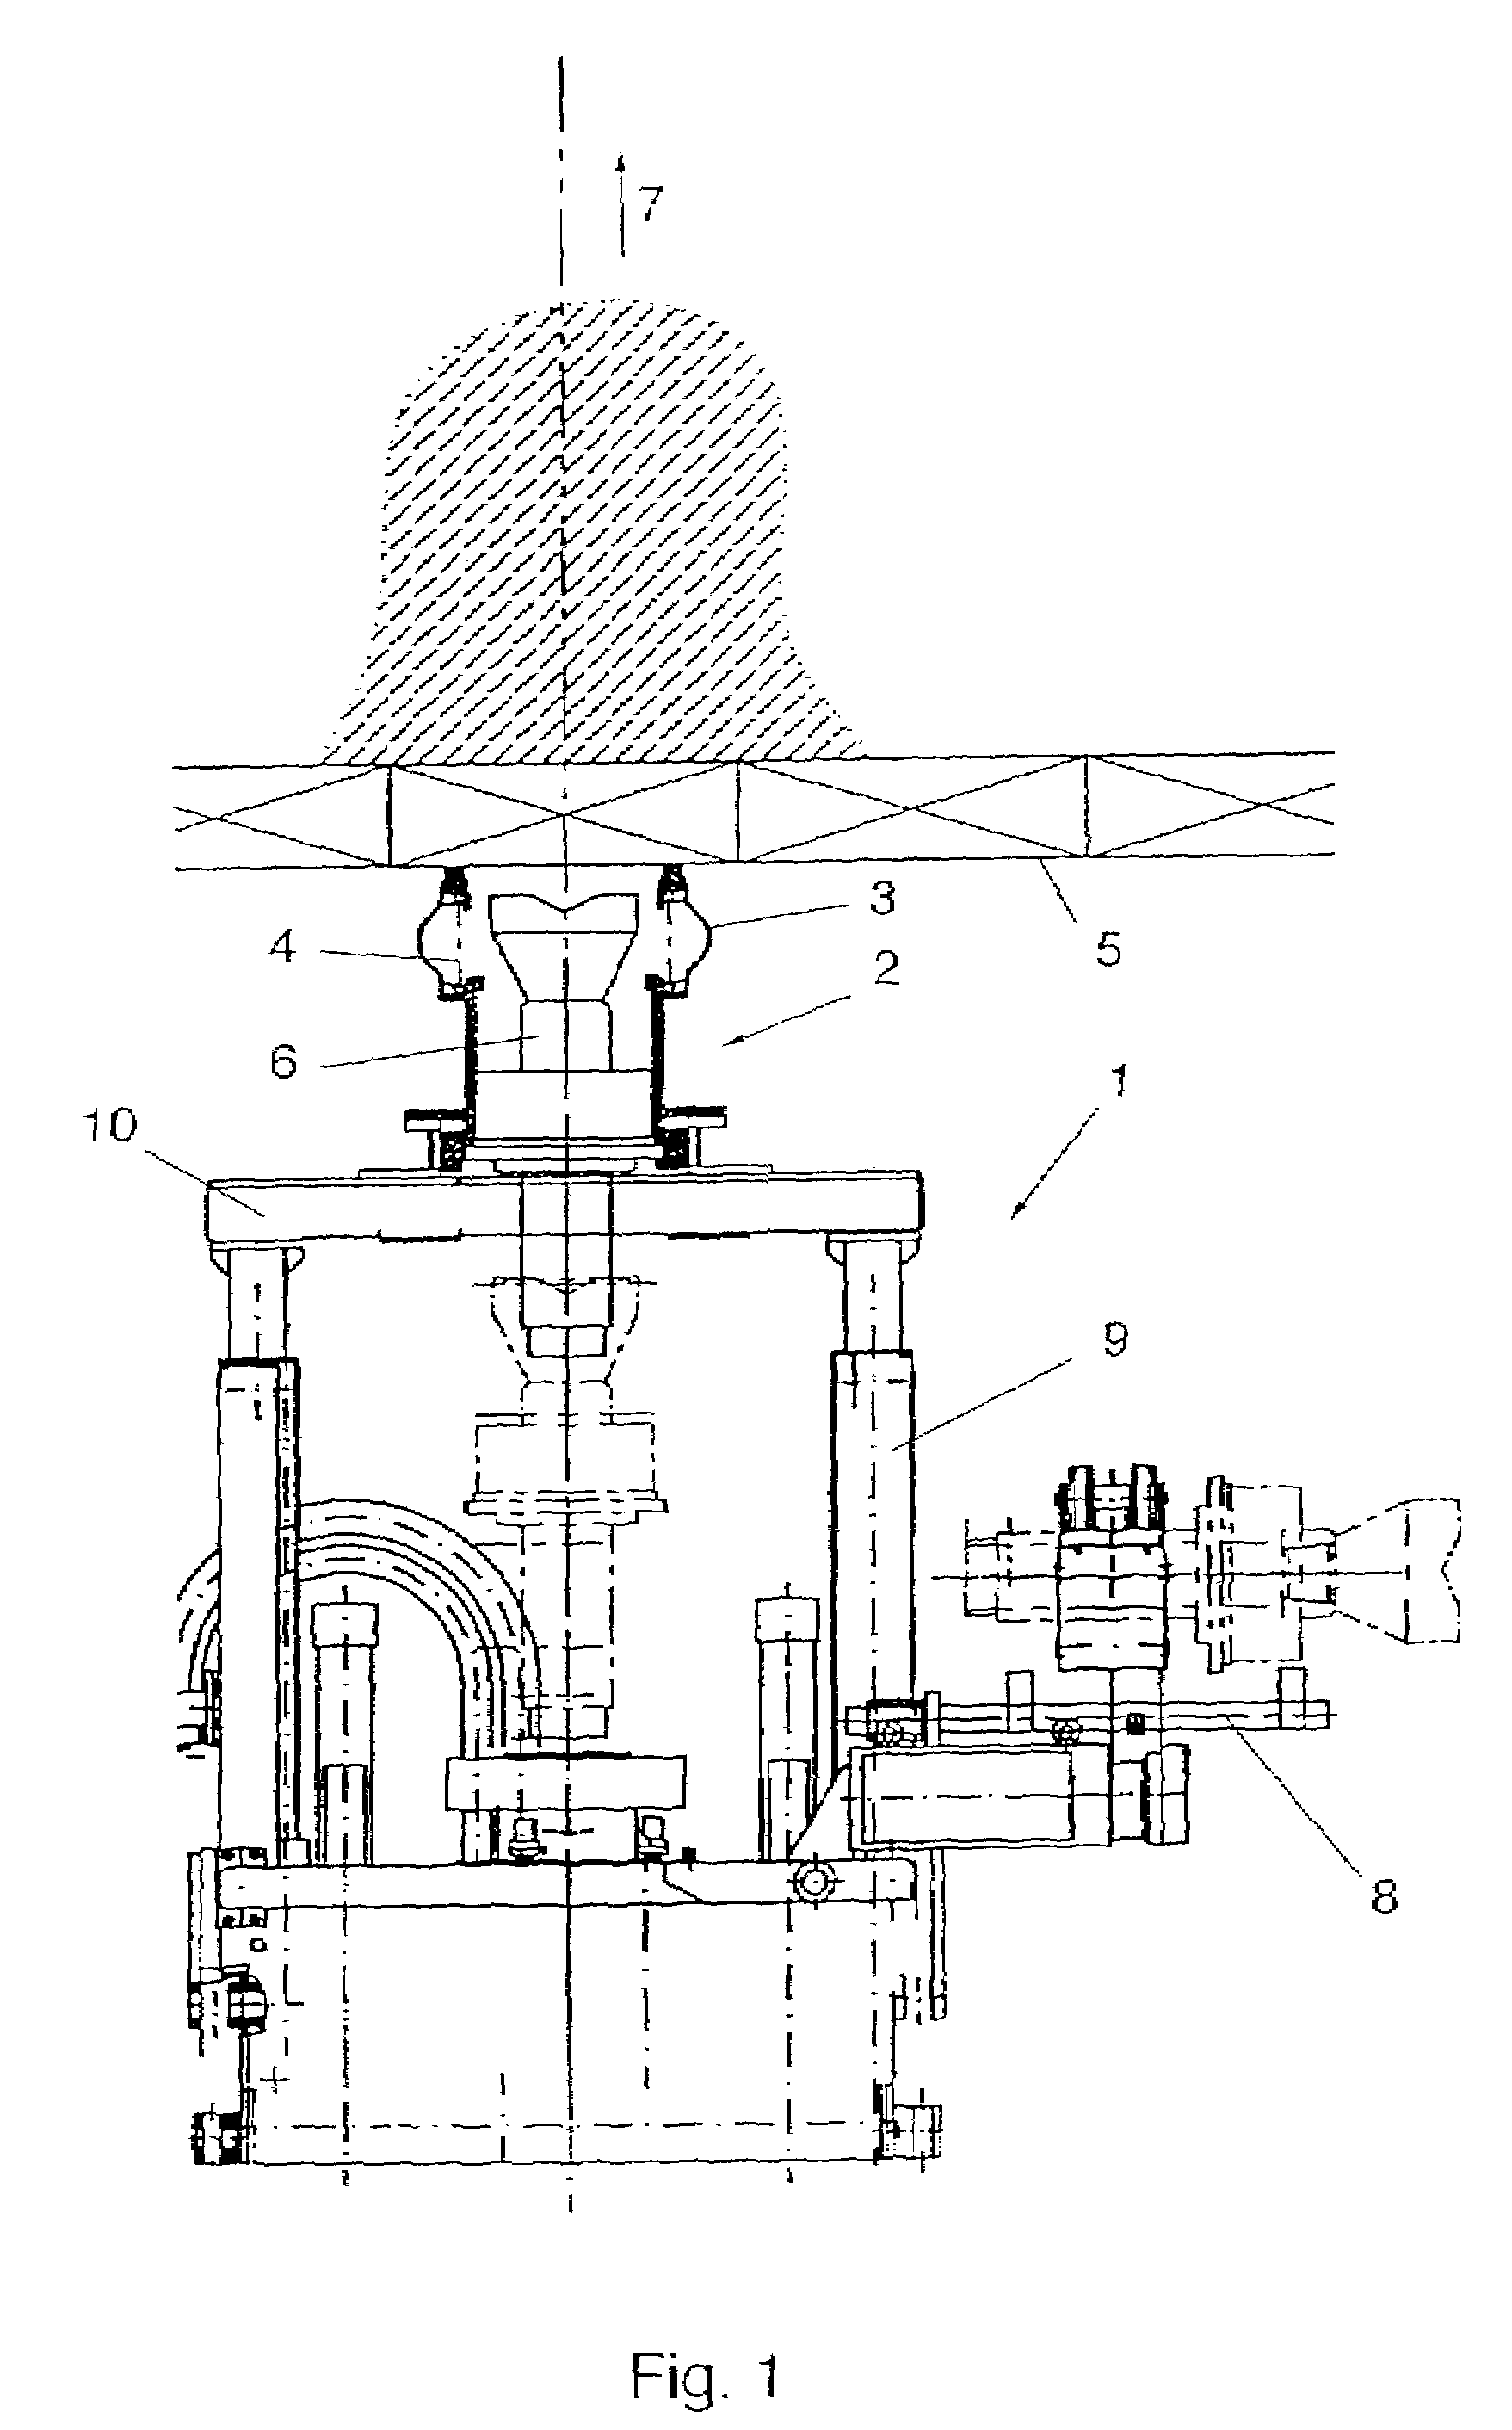 Device for sealing a drill hole and for discharging drillings or stripped extraction material